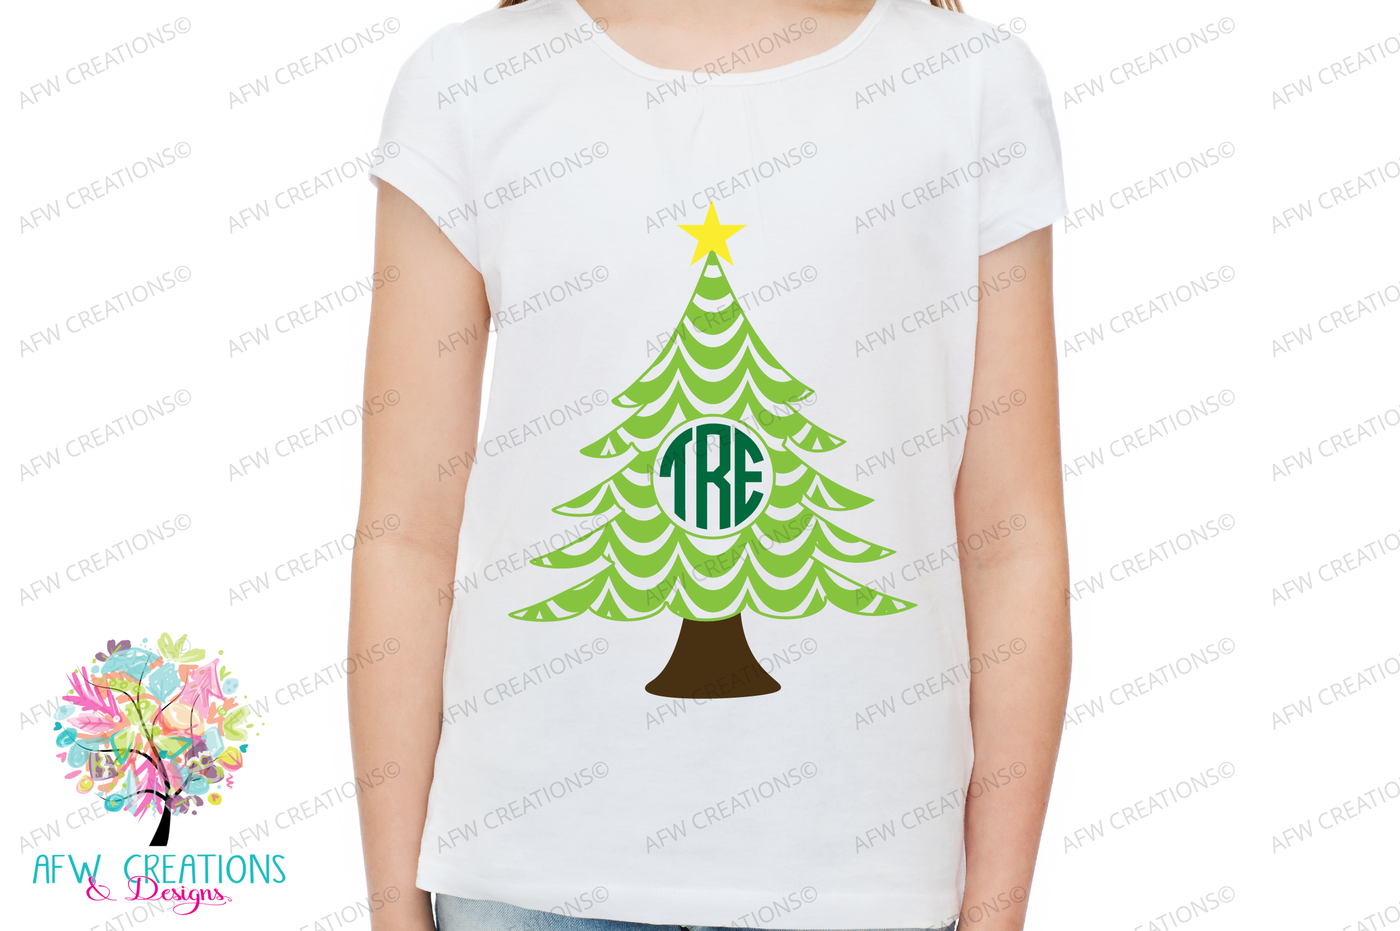 Monogram Patterned Trees Svg Dxf Eps Cut Files By Afw Designs Thehungryjpeg Com